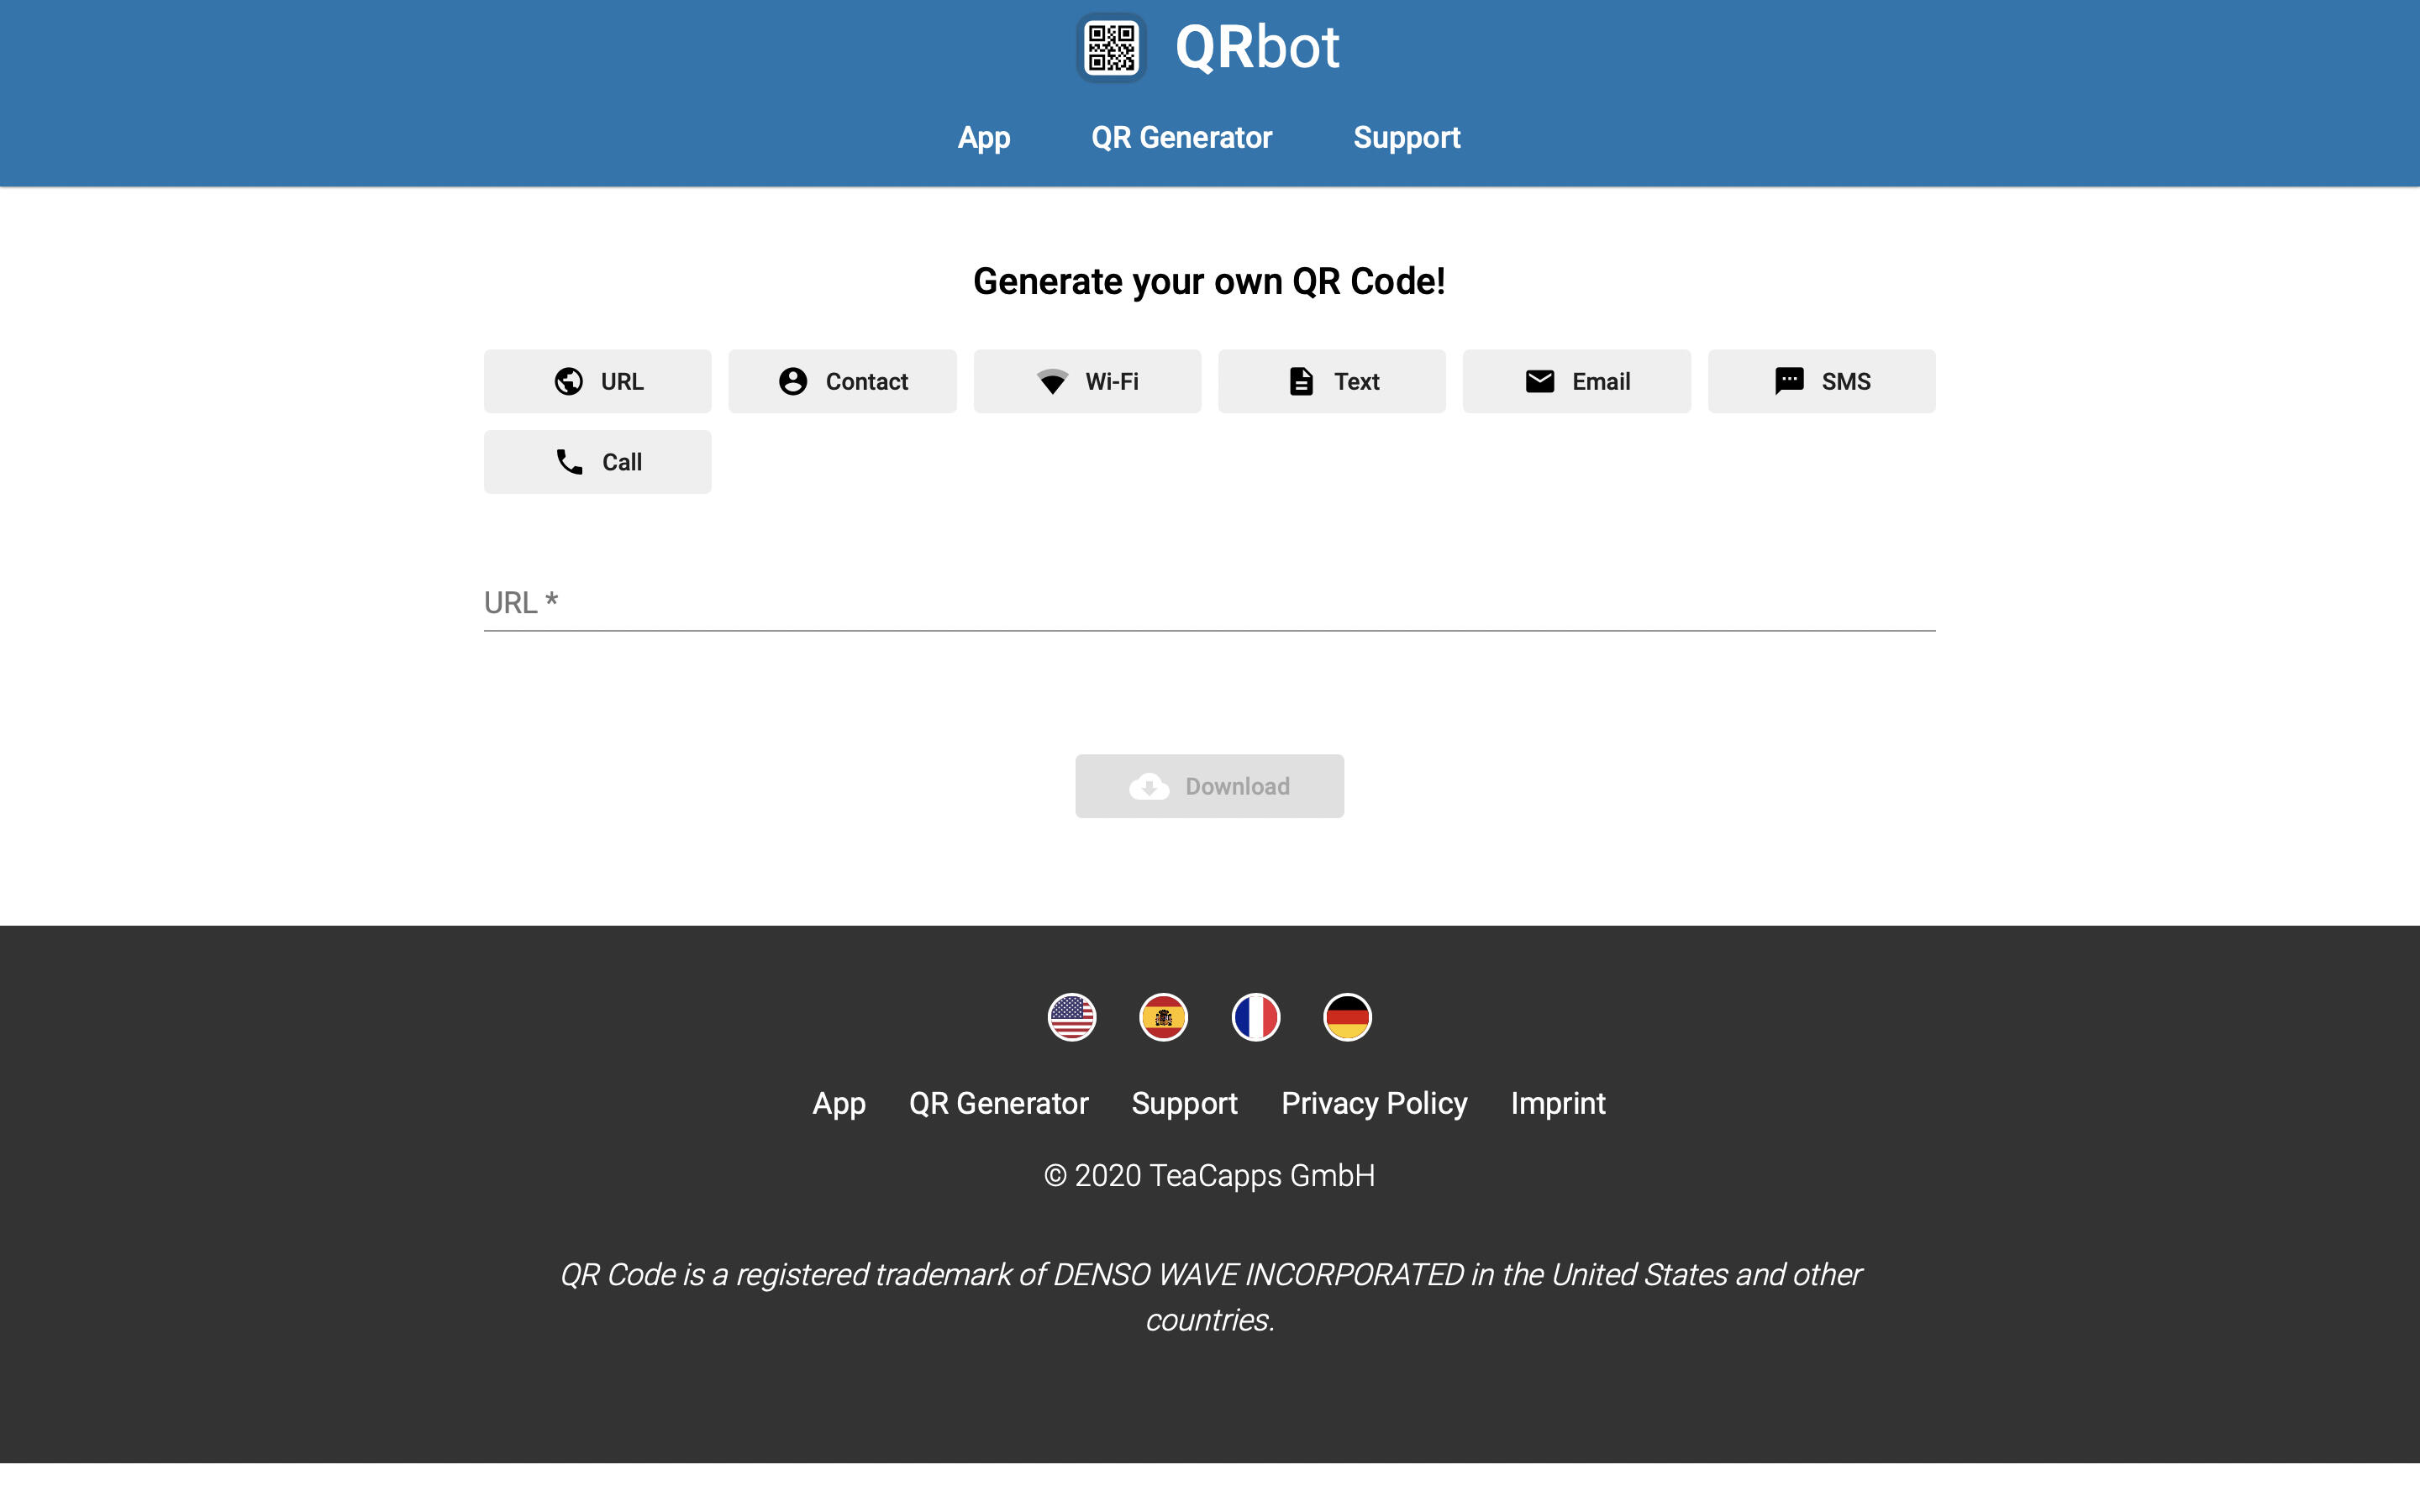 Screenshot of QRbot QR Generator page, with option to create codes for: URL, Contact, W-Fi, Text, Email, SMS, and Call.